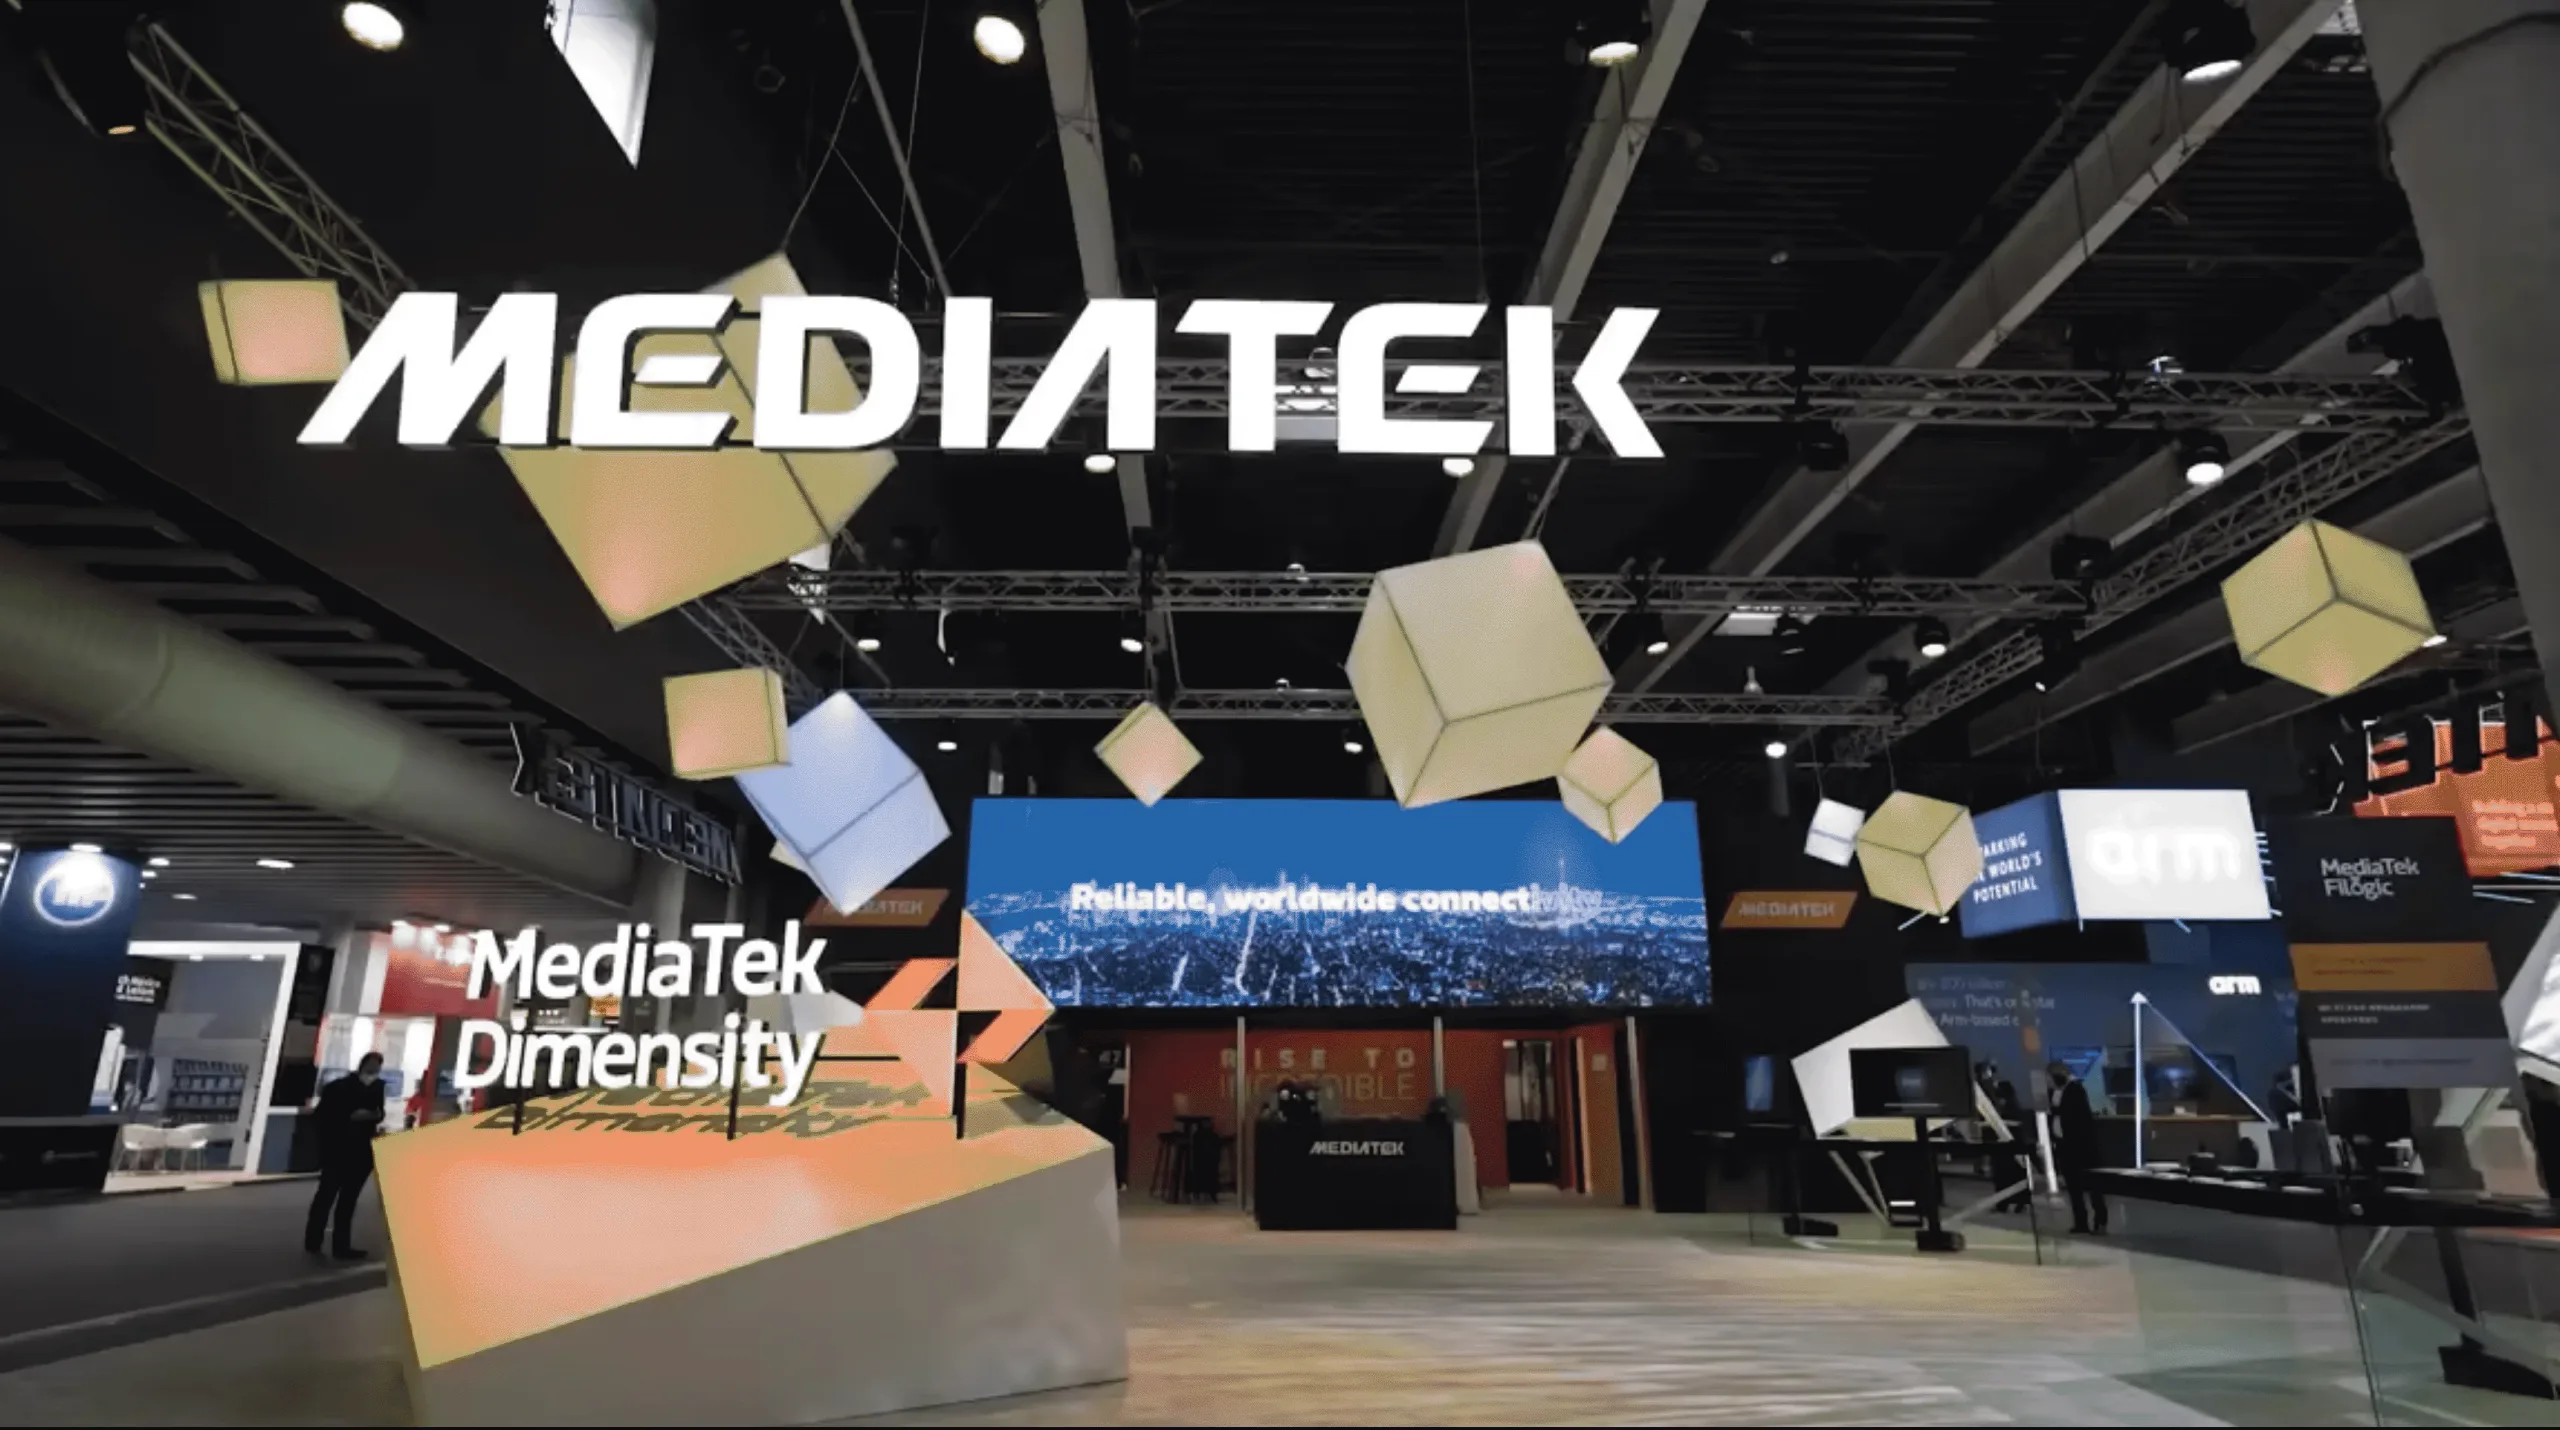 Mediatek Video thumbnail showing a still from Mediateks booth at MWC 2023